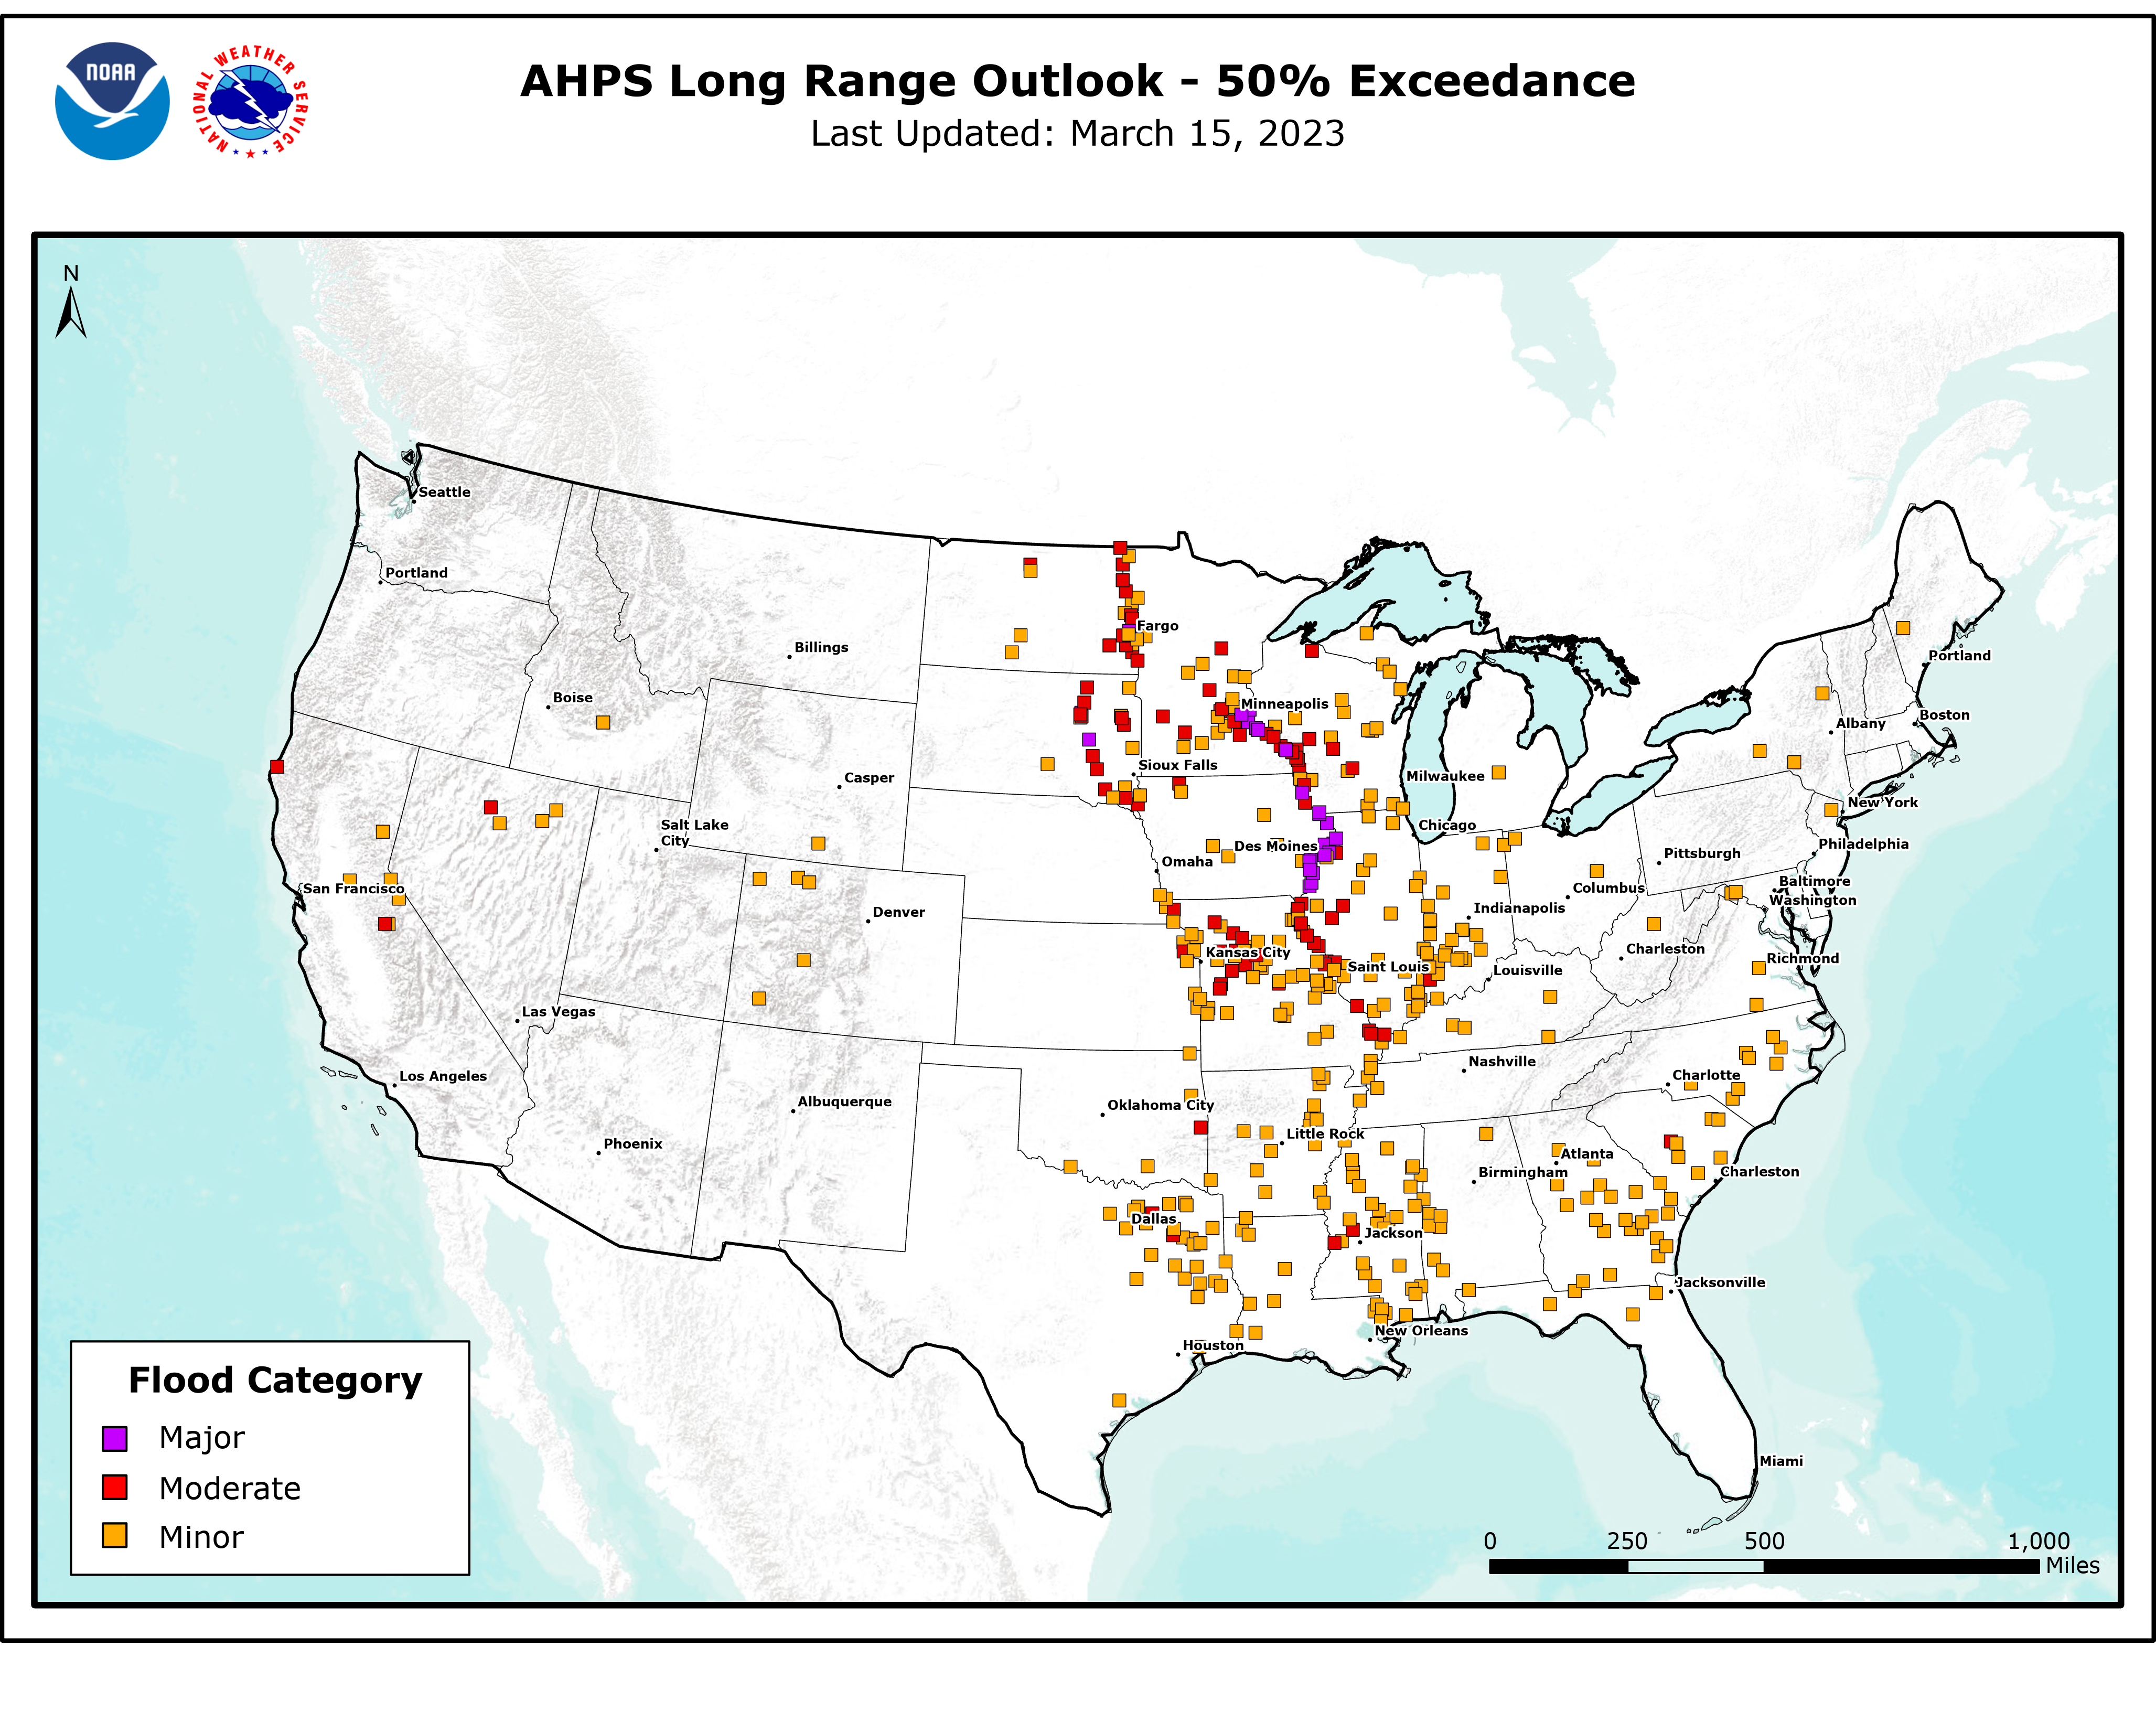 2023 Greater than 50% chance of exceeding flood categories